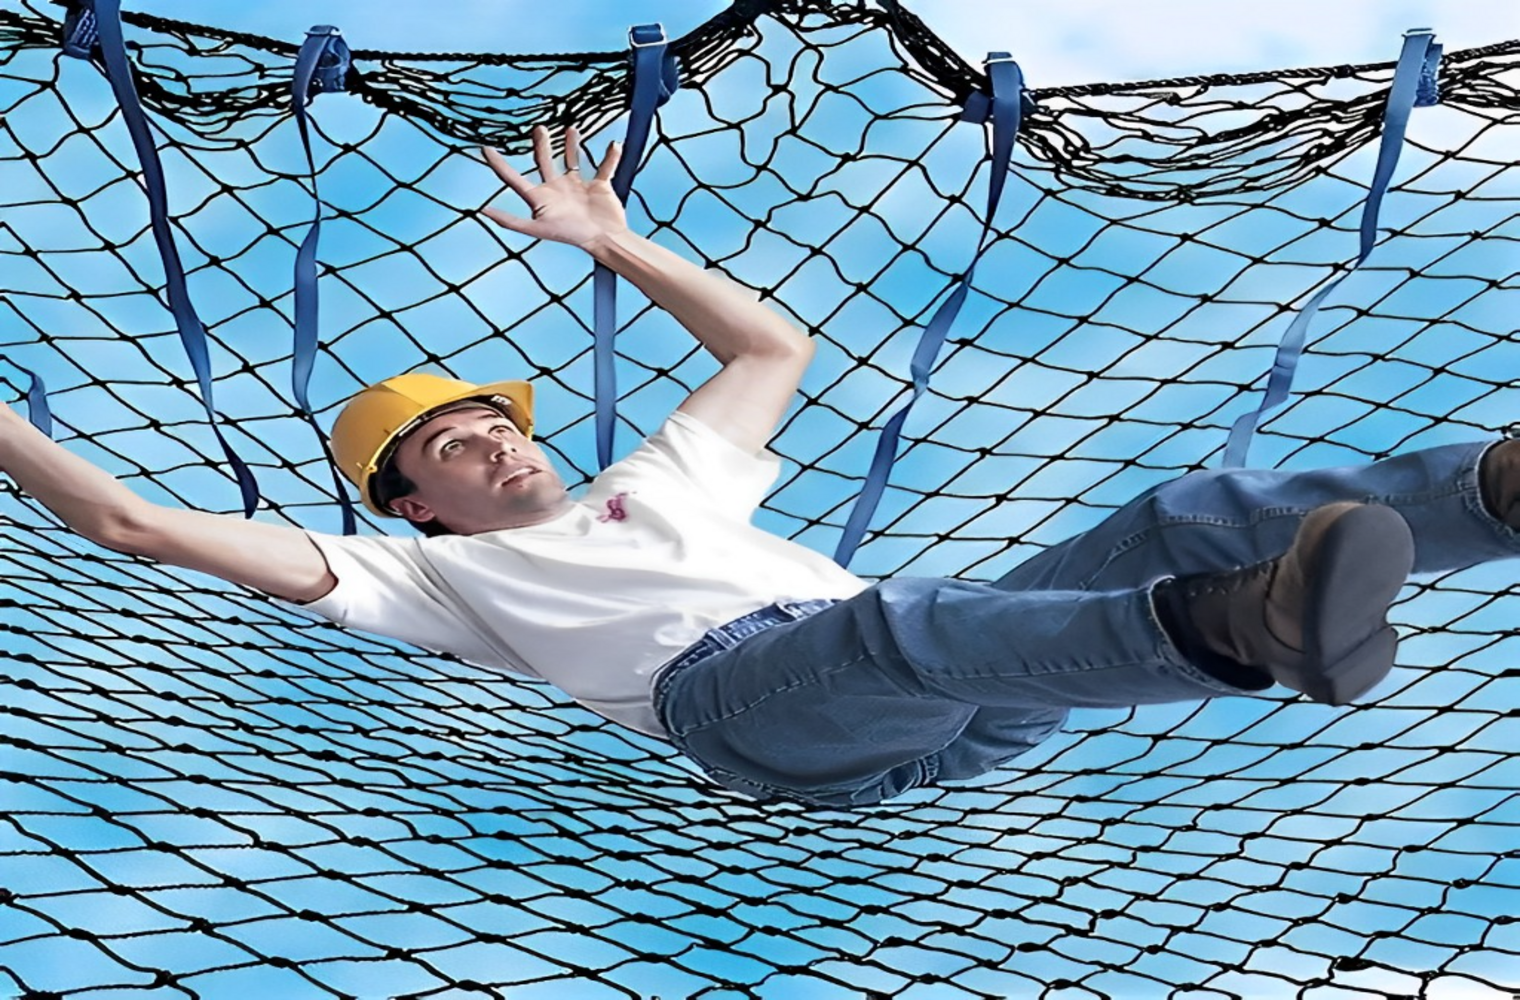 Safety Net Fall Protection